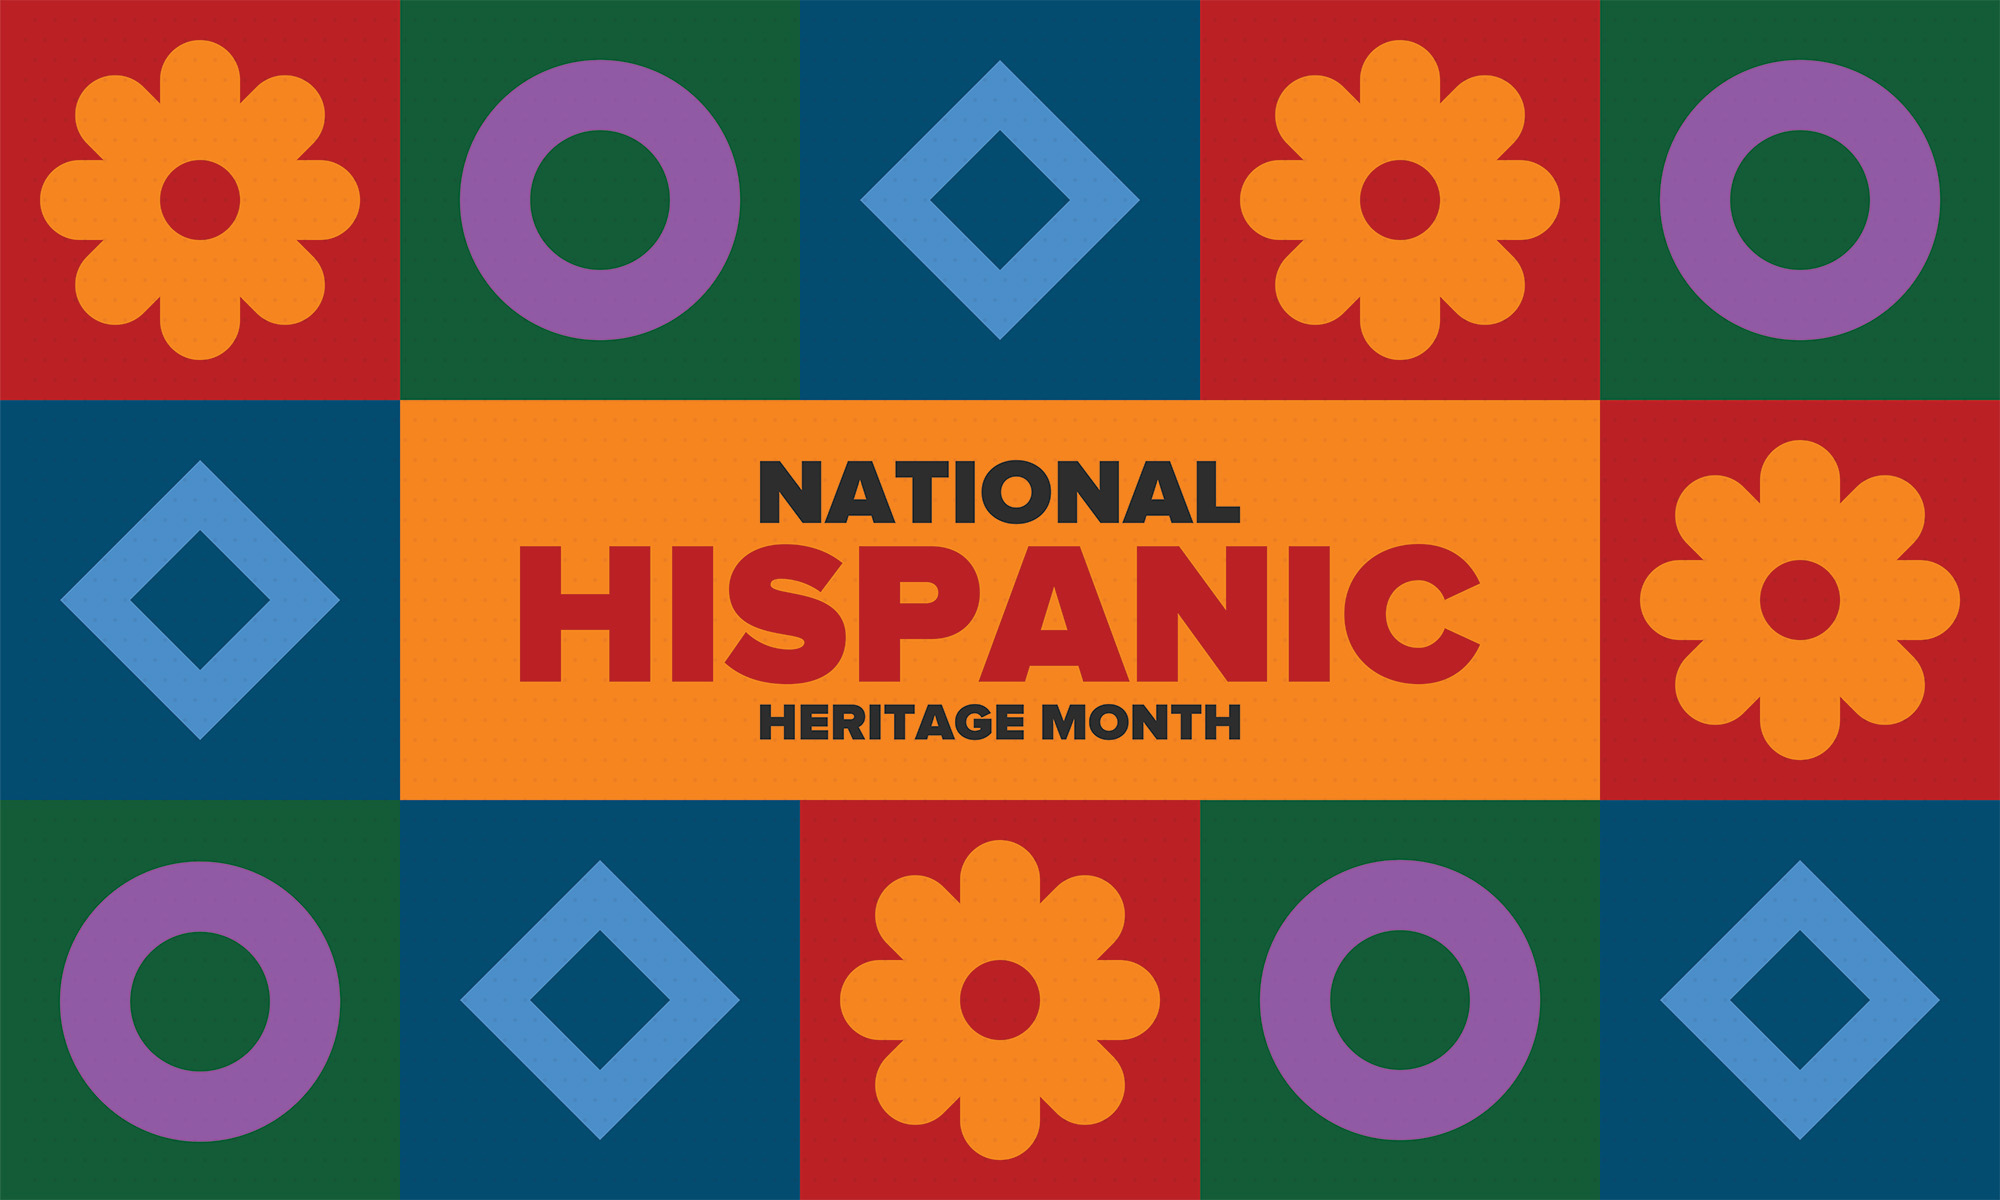 alternating blocks of color containing geometric shapes surrounding text National Hispanic Heritage Month